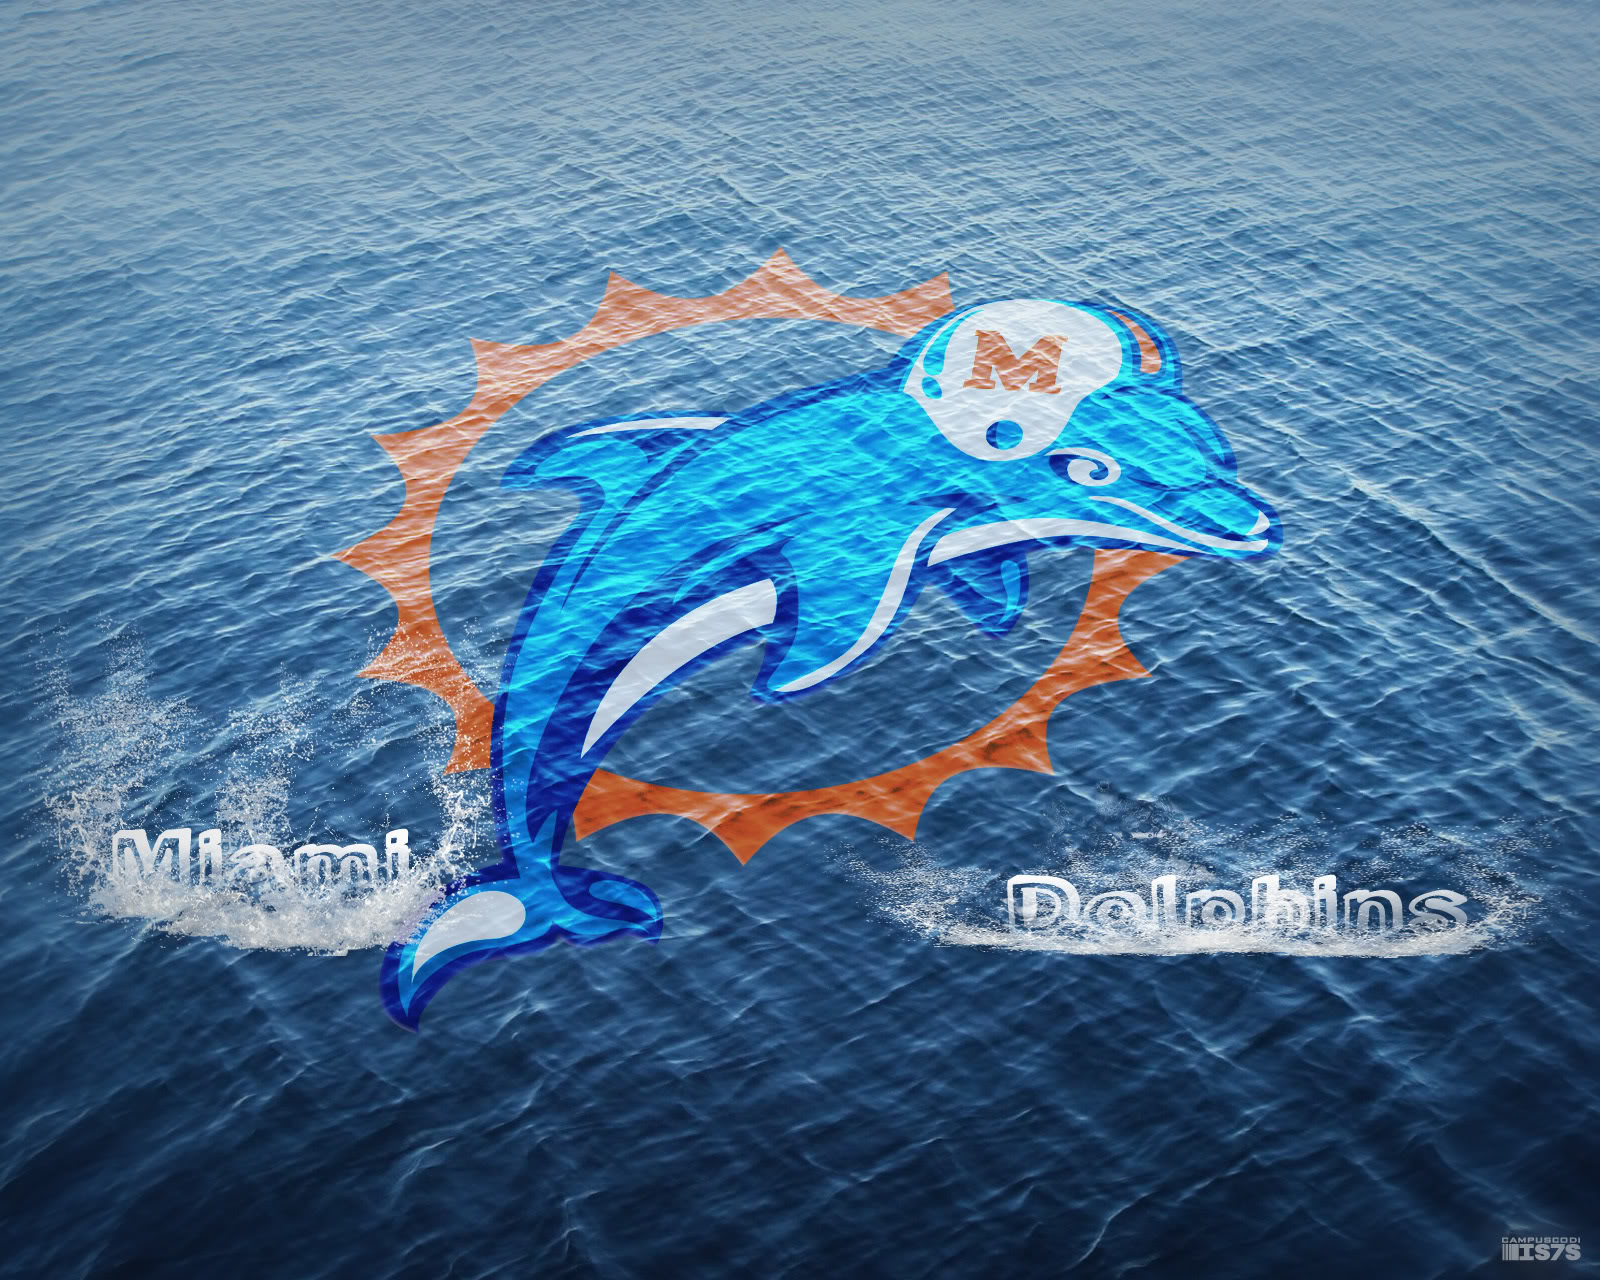 miami, Dolphins, Nfl, Football, Re Wallpaper